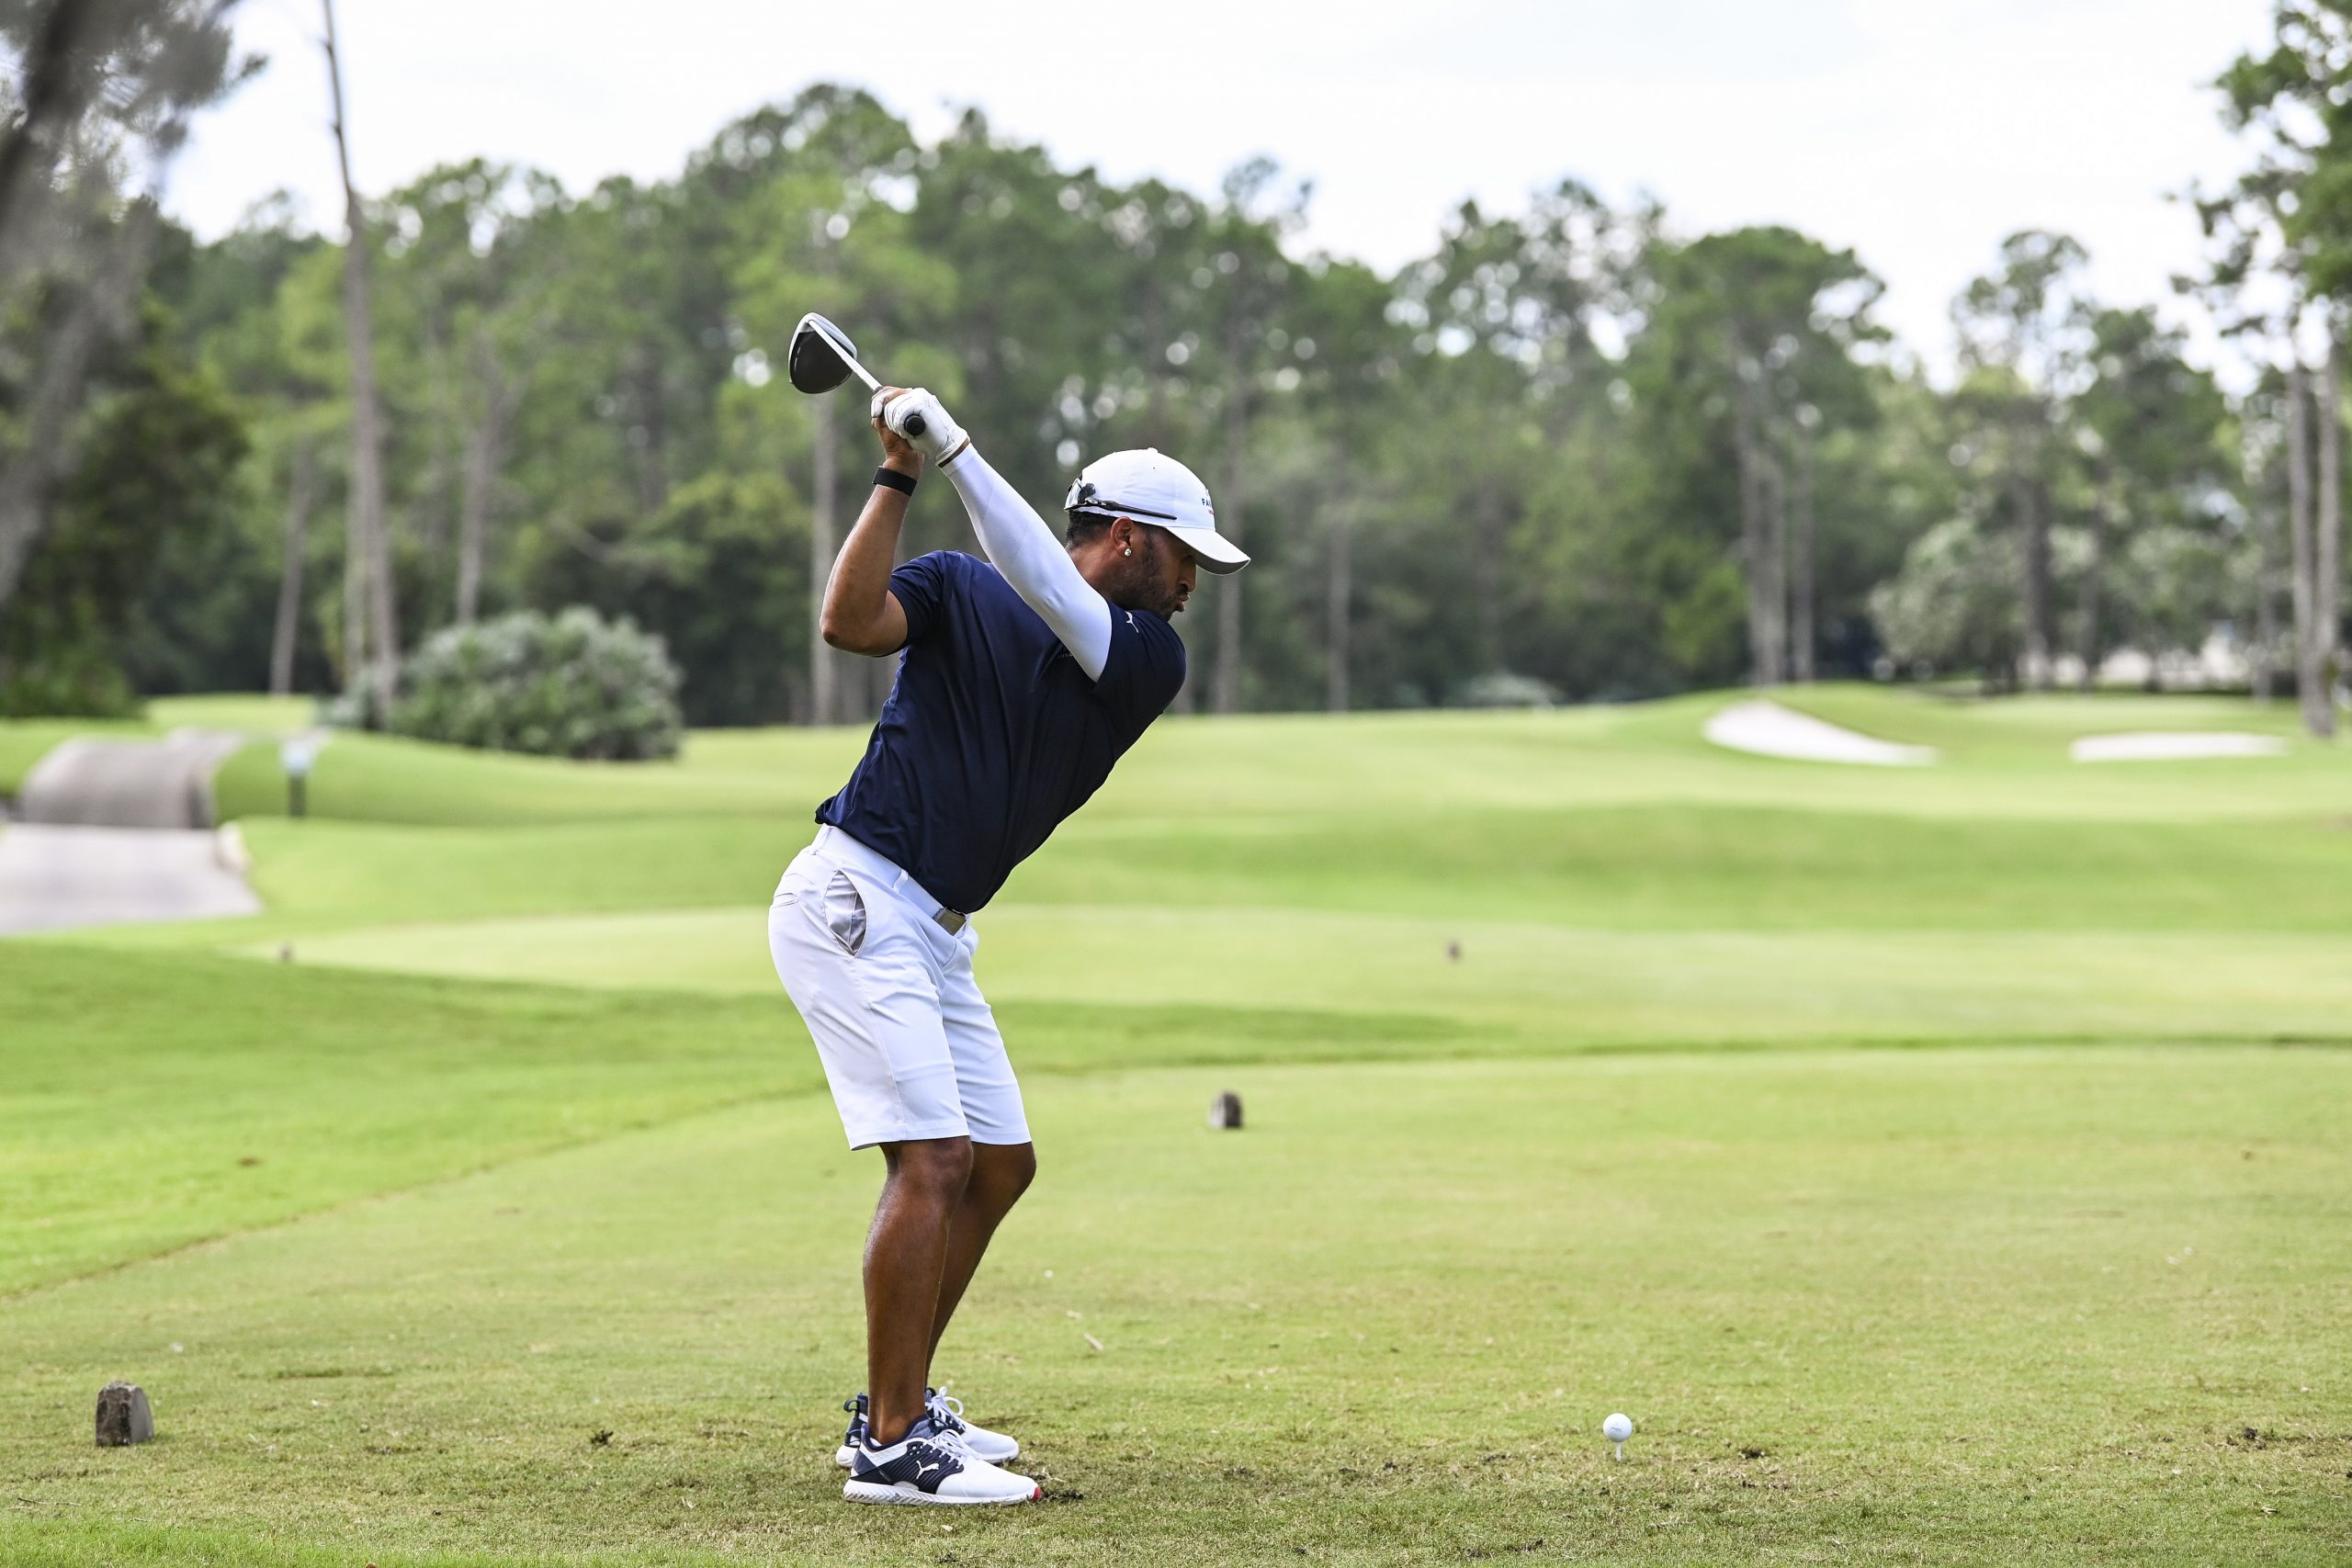 Willie Mack III hits a tee shot on the 10th hole during the final round of an APGA Tour